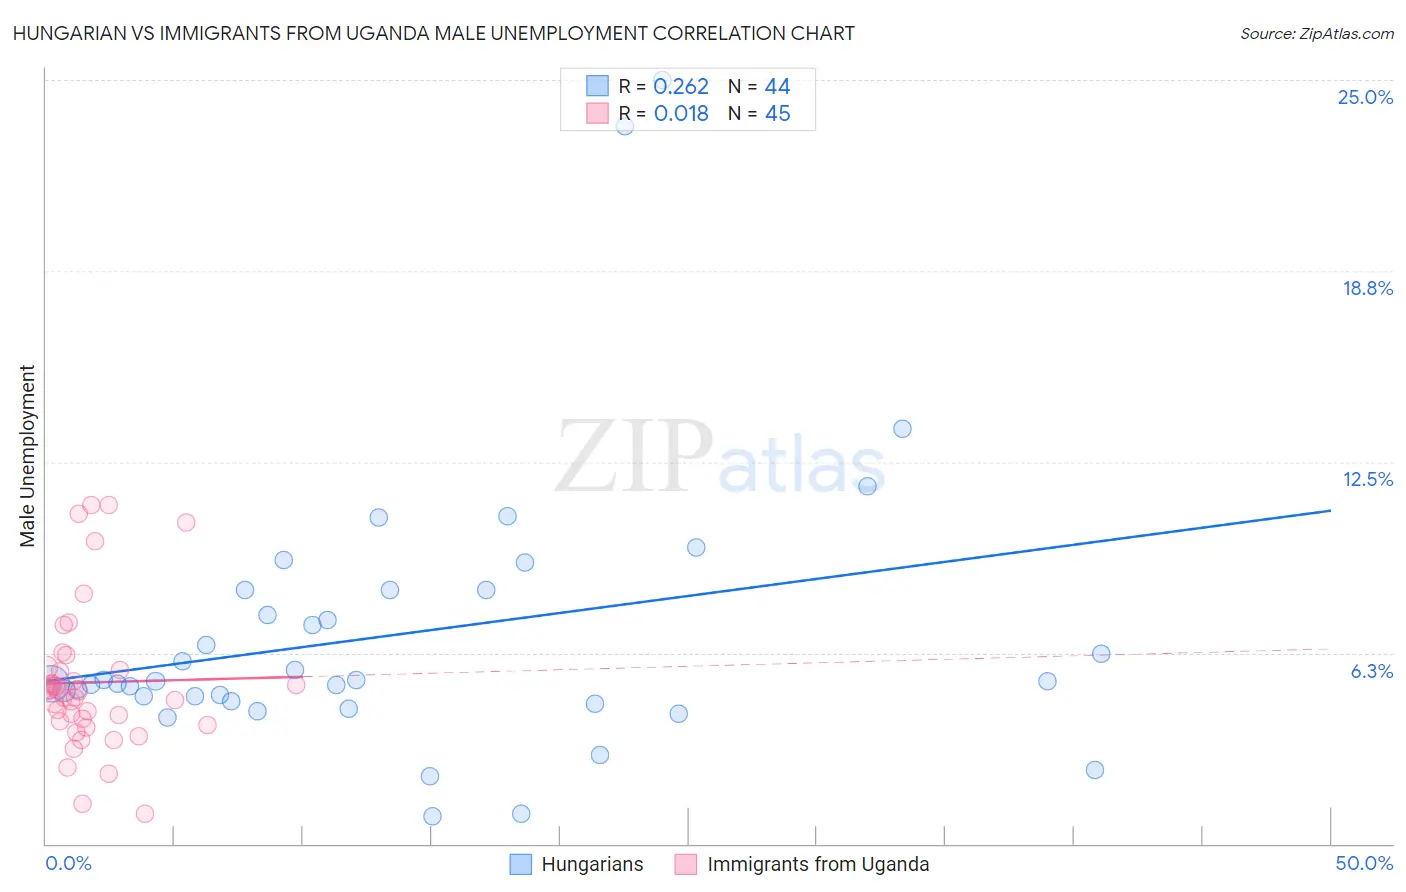 Hungarian vs Immigrants from Uganda Male Unemployment